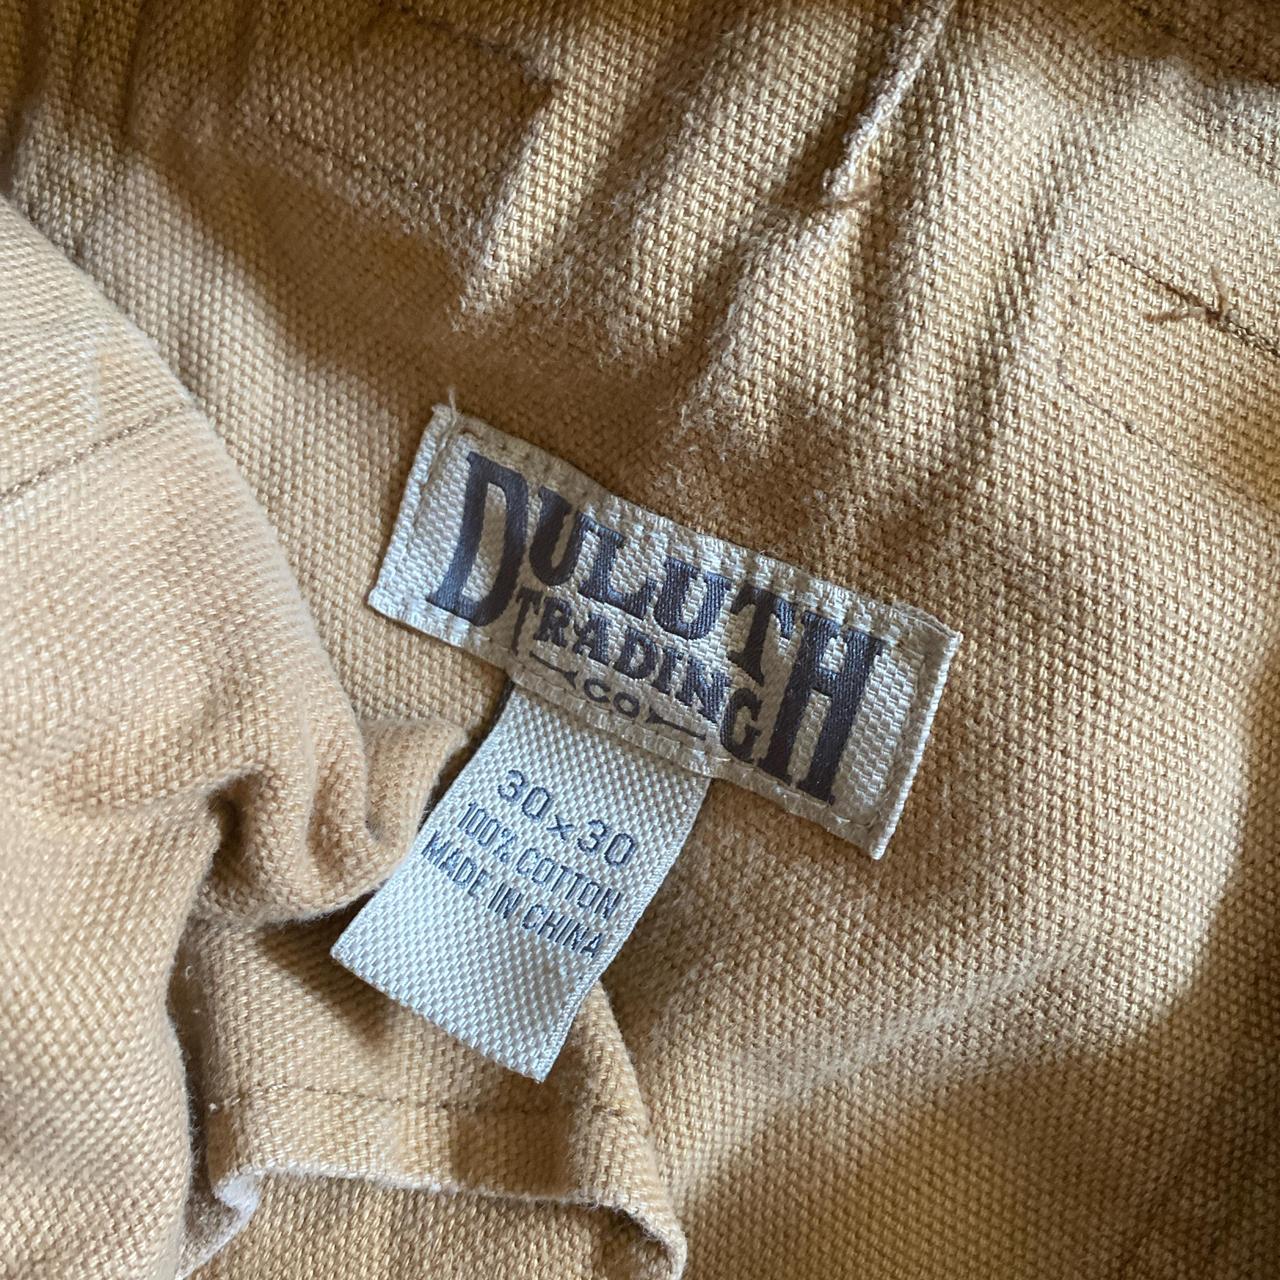 Deluth Trading Company work pants in an earthy grey - Depop